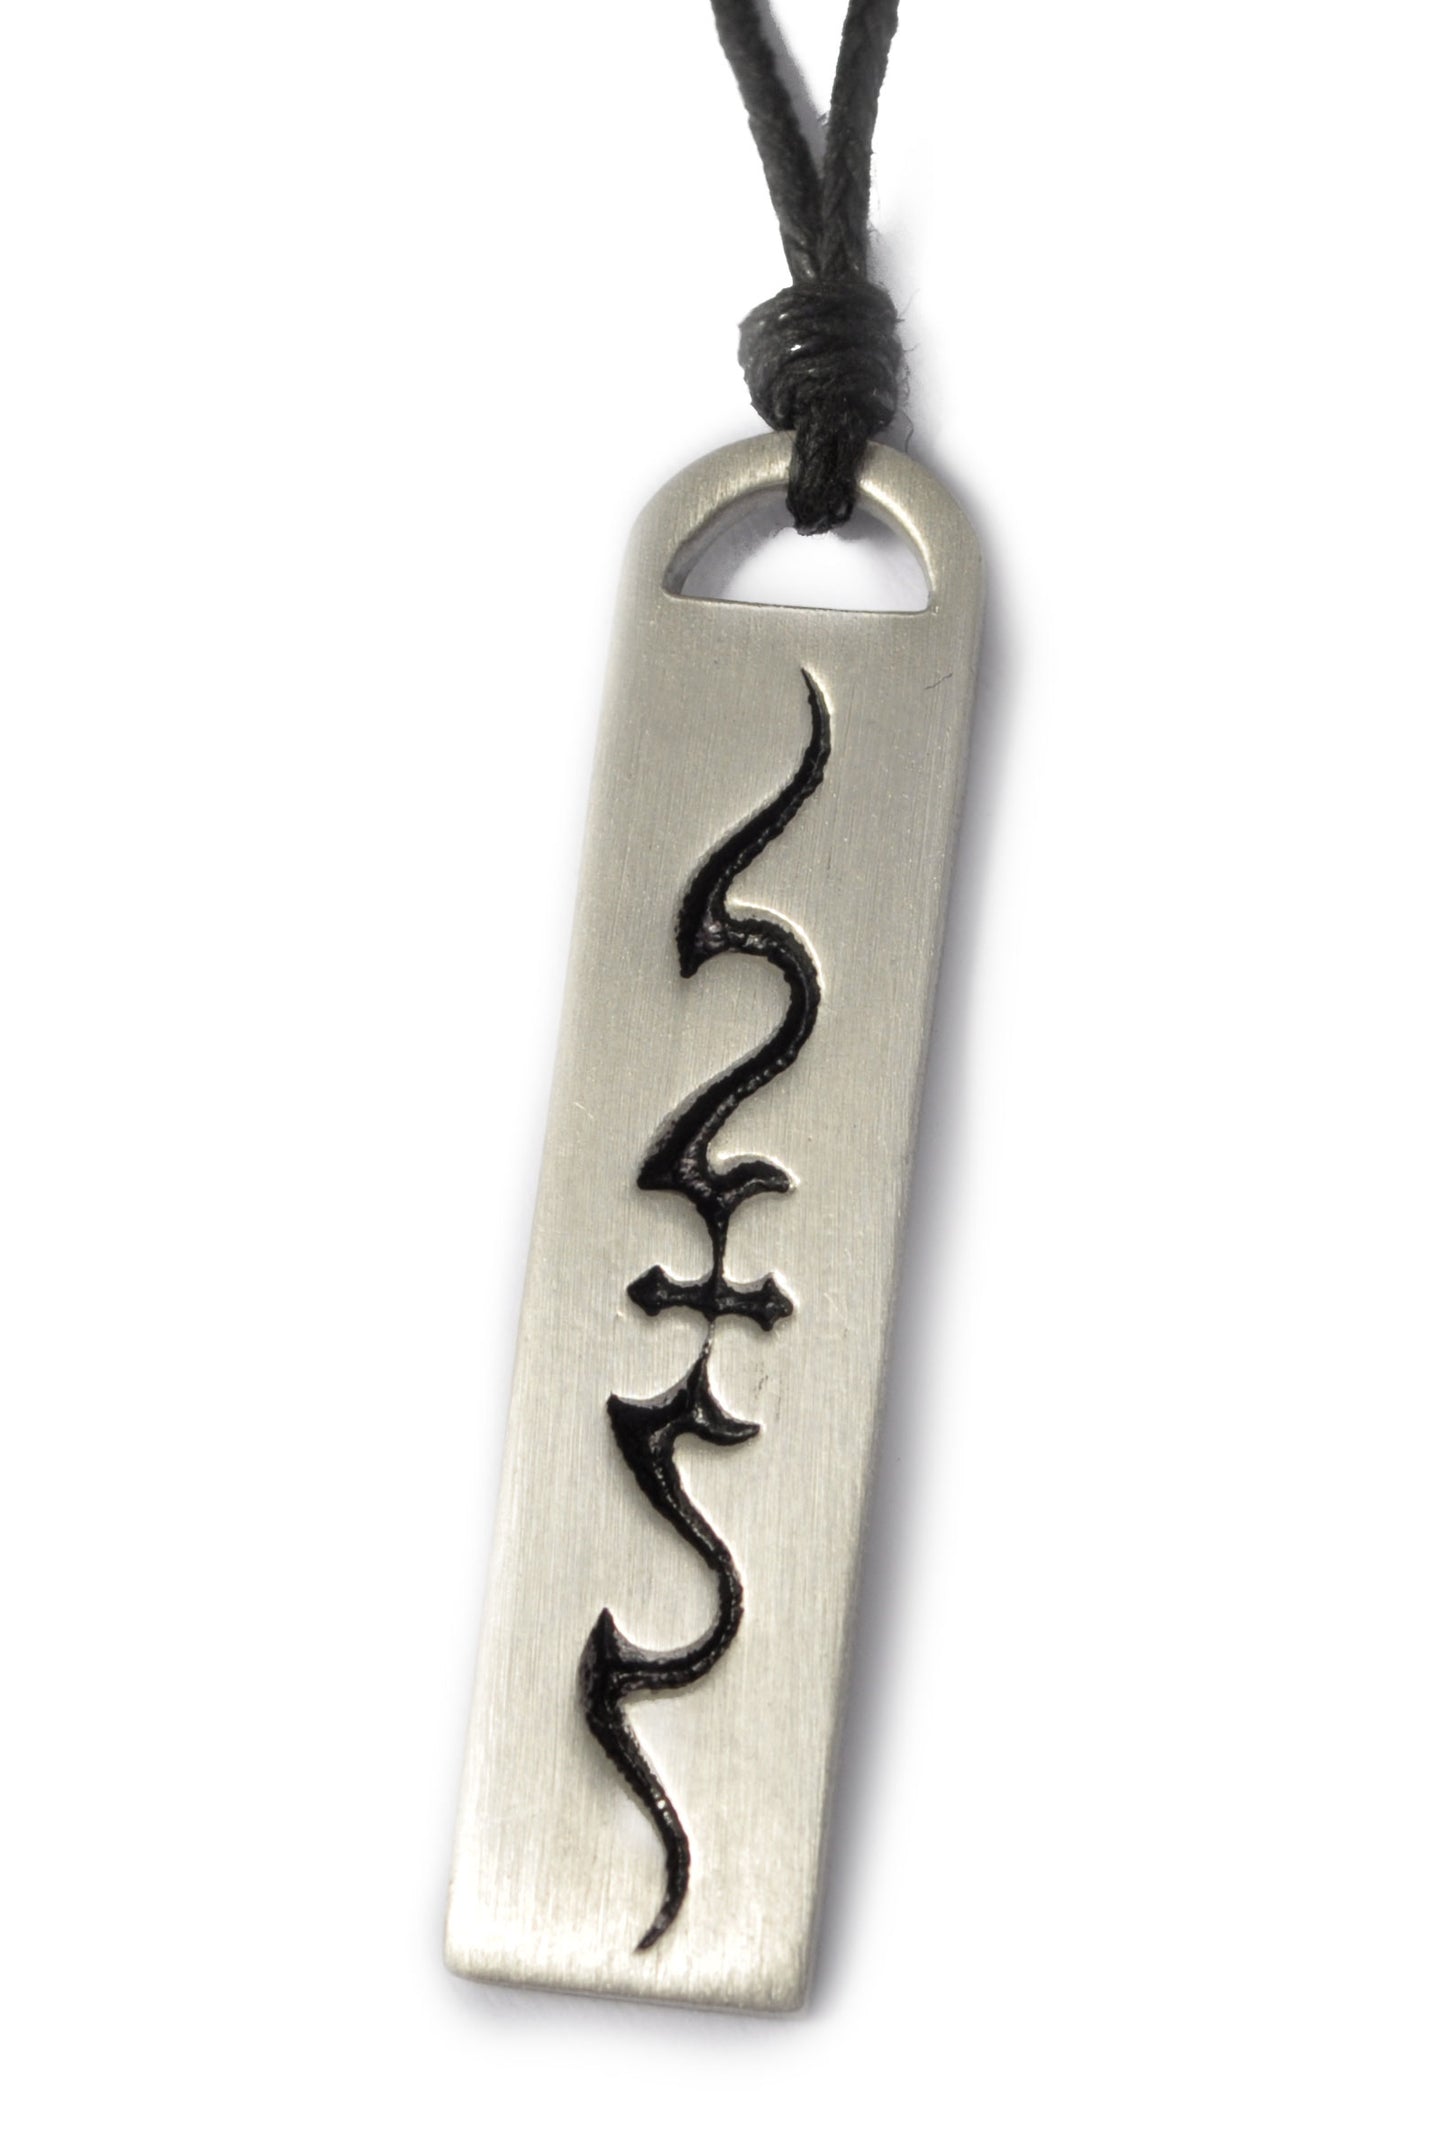 Tribal Tatoo Design Silver Pewter Charm Necklace Pendant Jewelry